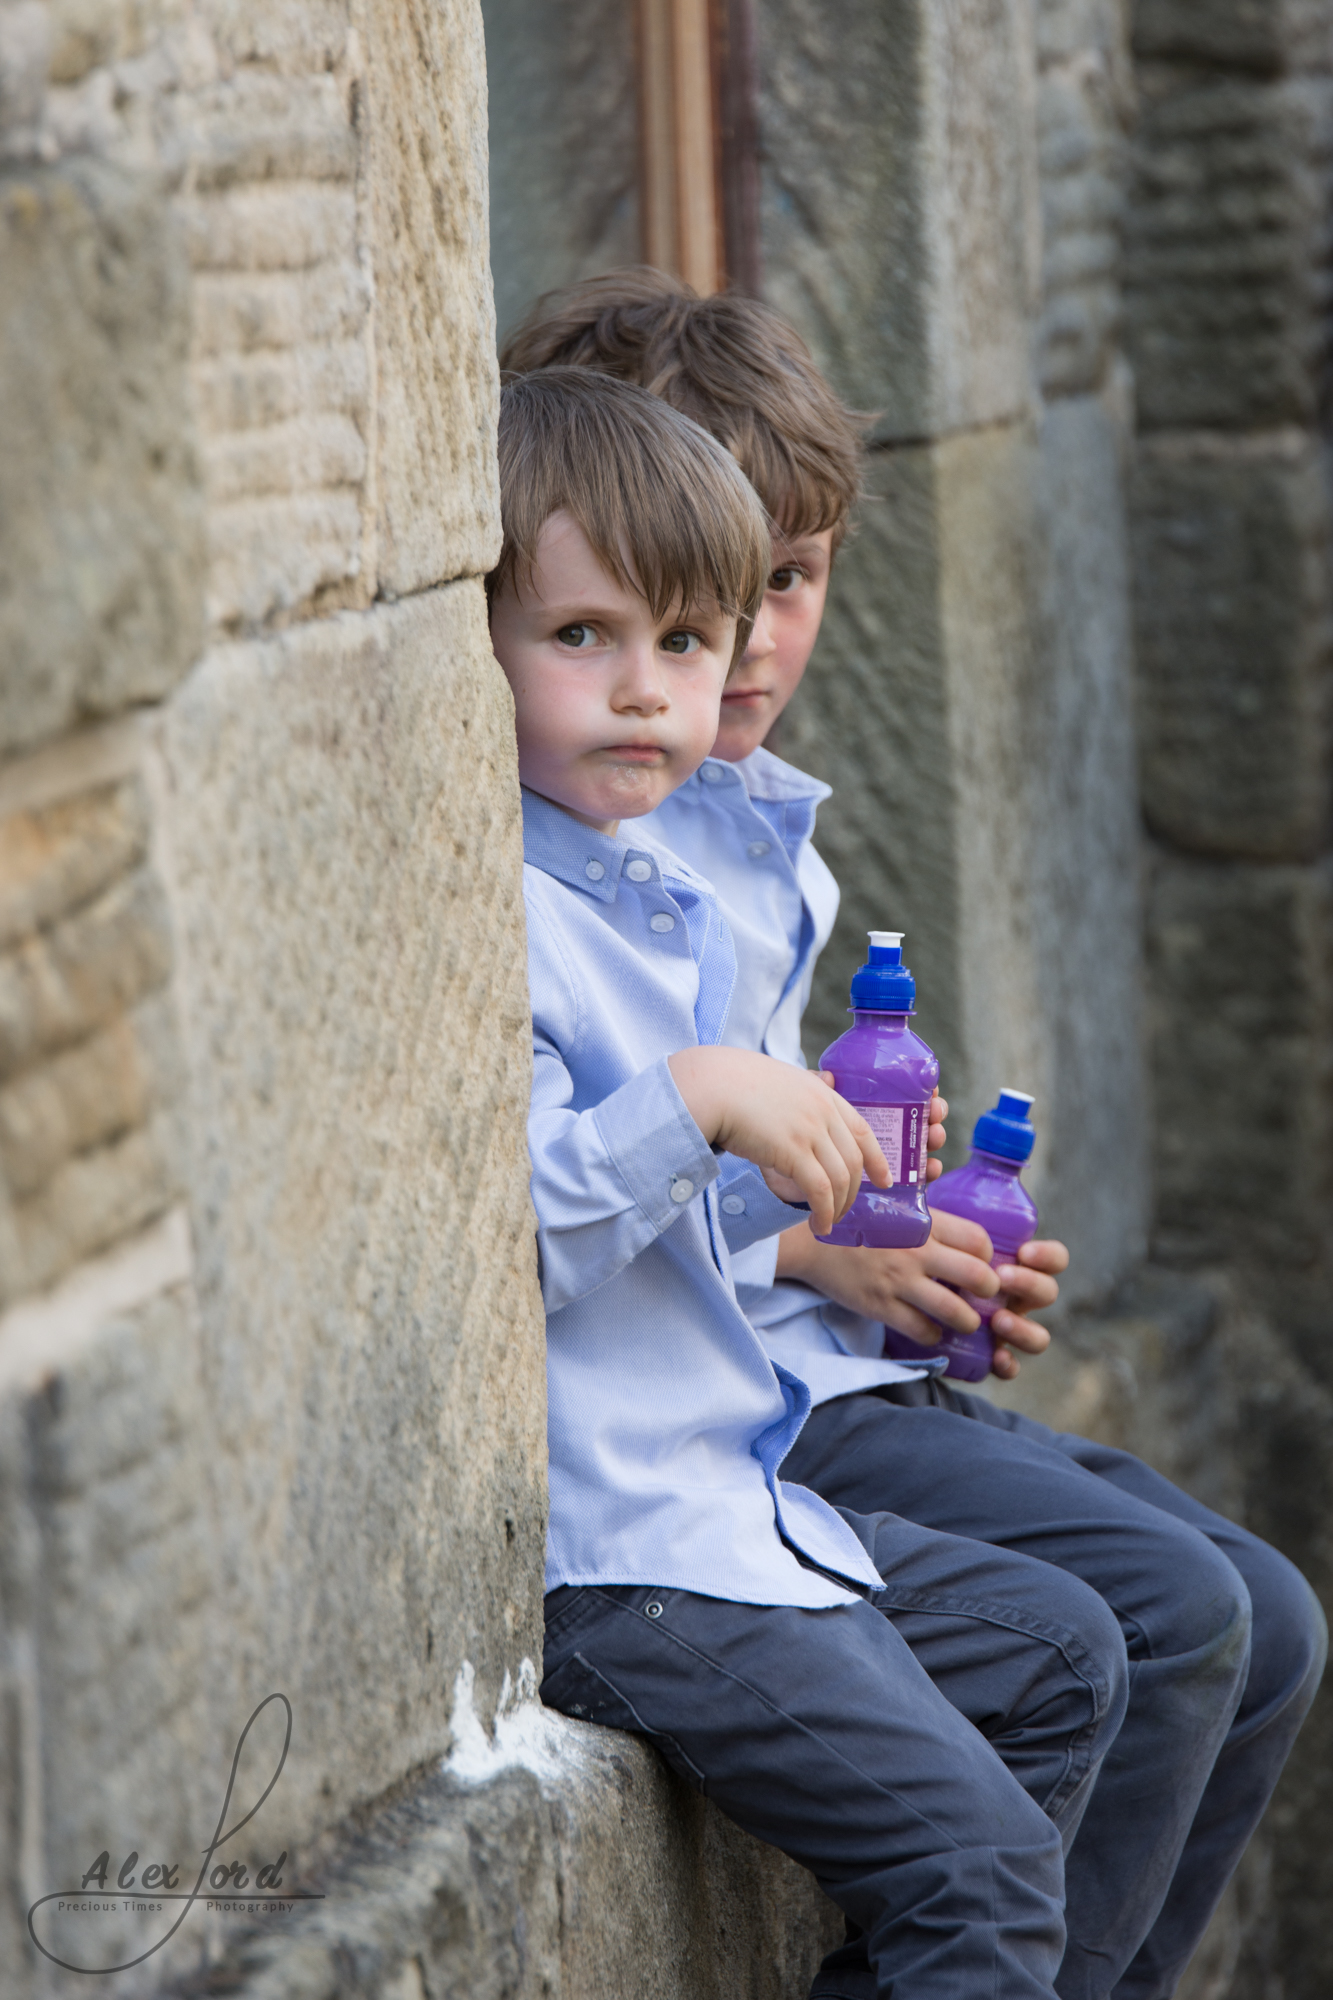 Two young boy wedding guests sit on a wall and have a fruit shot drink during the wedding reception welcome drinks